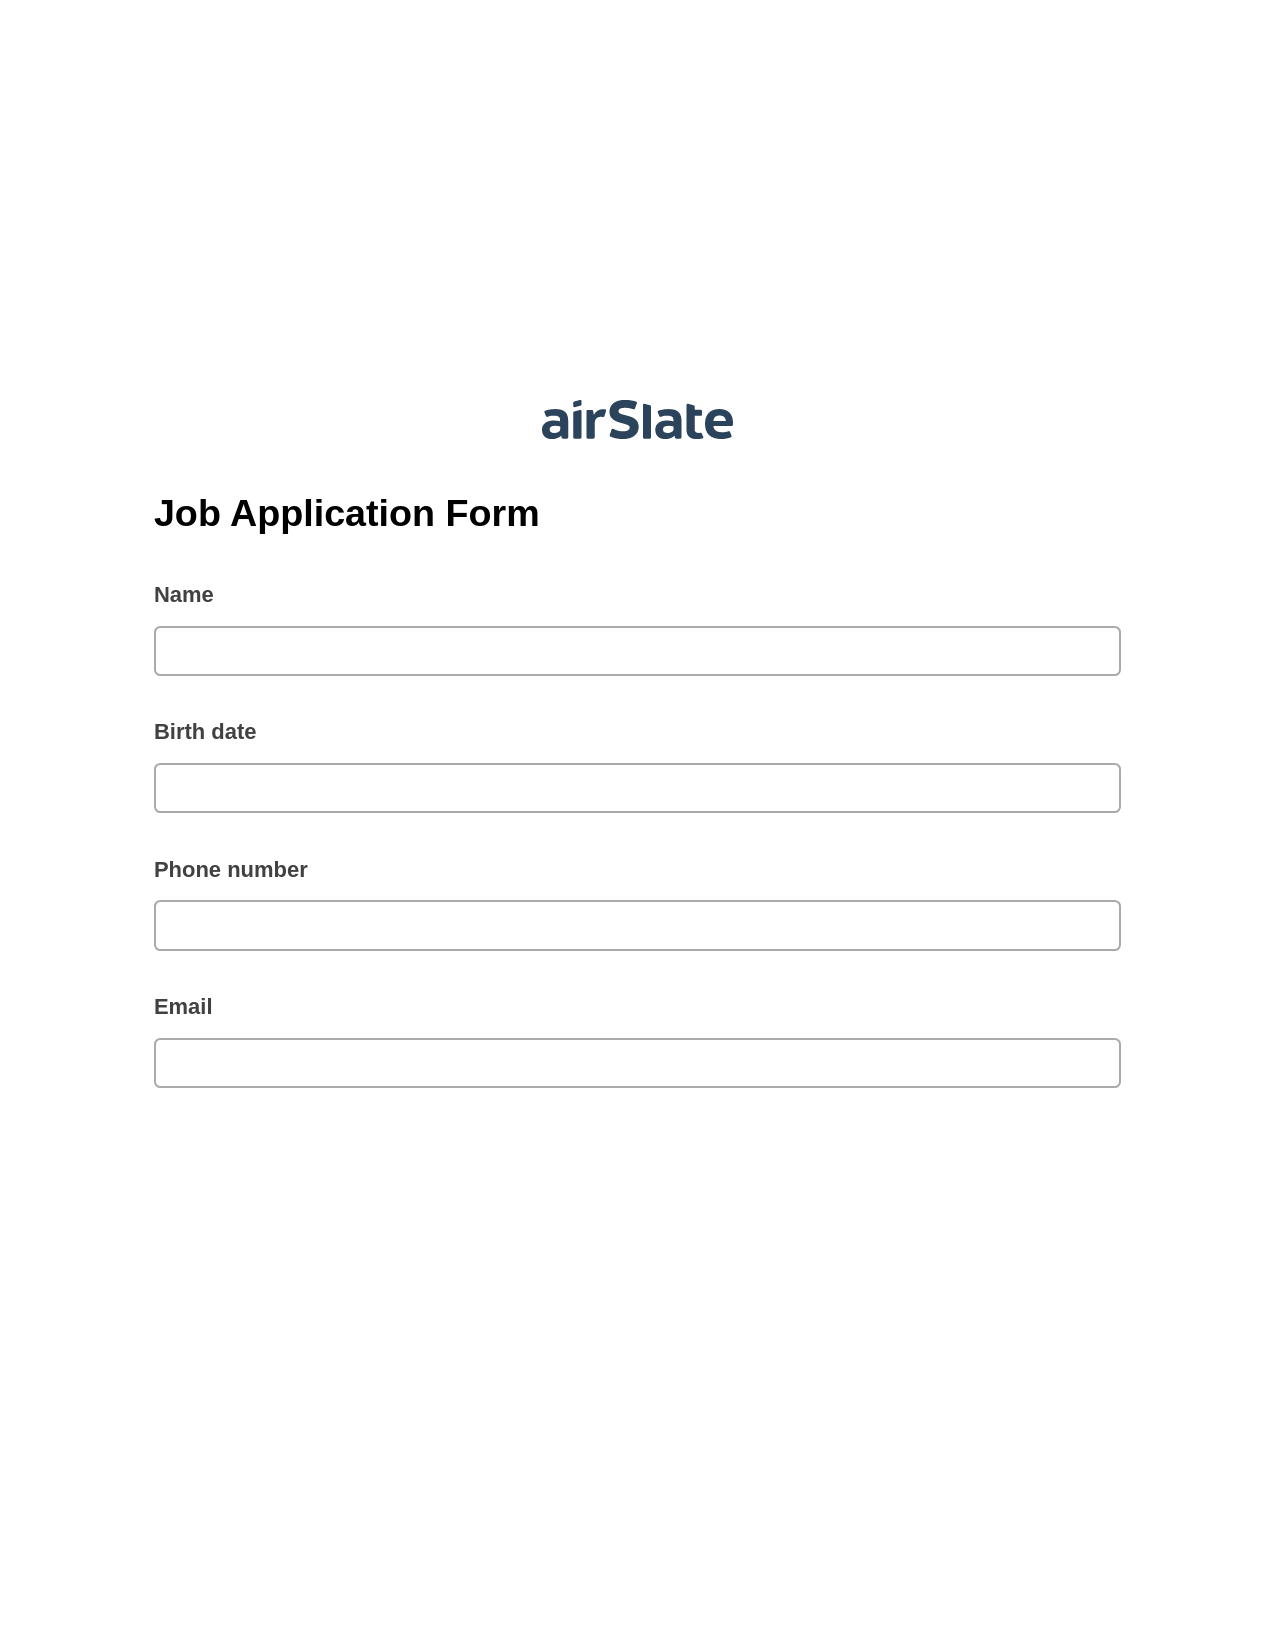 Multirole Job Application Form Pre-fill from Excel Spreadsheet Dropdown Options Bot, Text Message Notification Bot, Export to Formstack Documents Bot